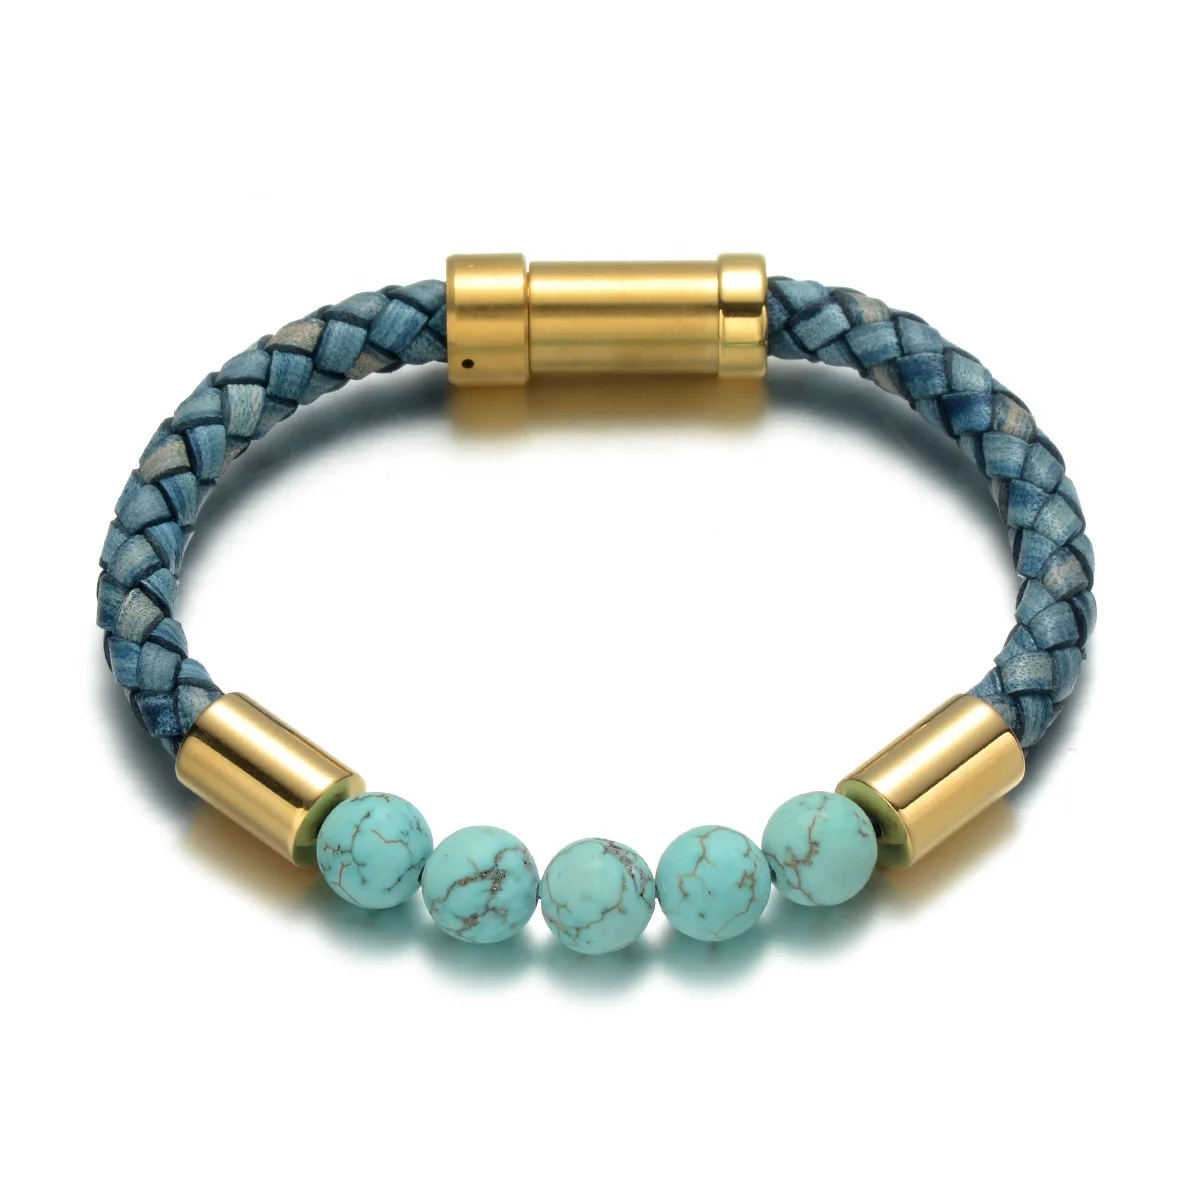 

REAMOR 2021 New Blue-veins Natural Turquoise Stone Bracelet Bangle Braided Leather 8mm Beaded Bracelet with Clasp Gold Plating